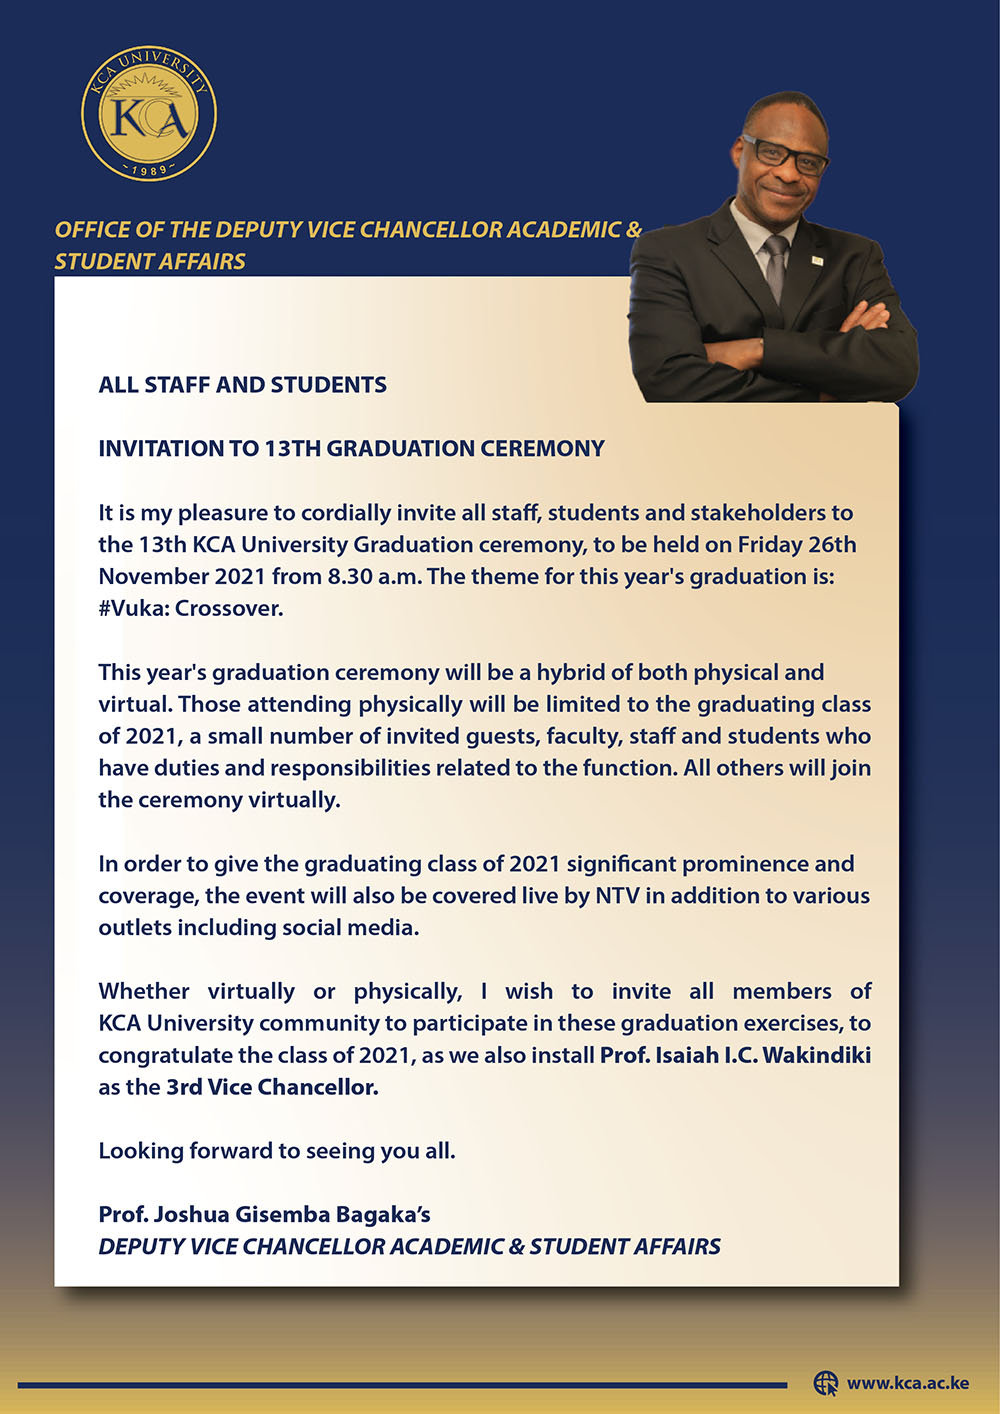 Invitation to the 13th Graduation Ceremony & Installation of the 3rd Vice Chancellor & CEO